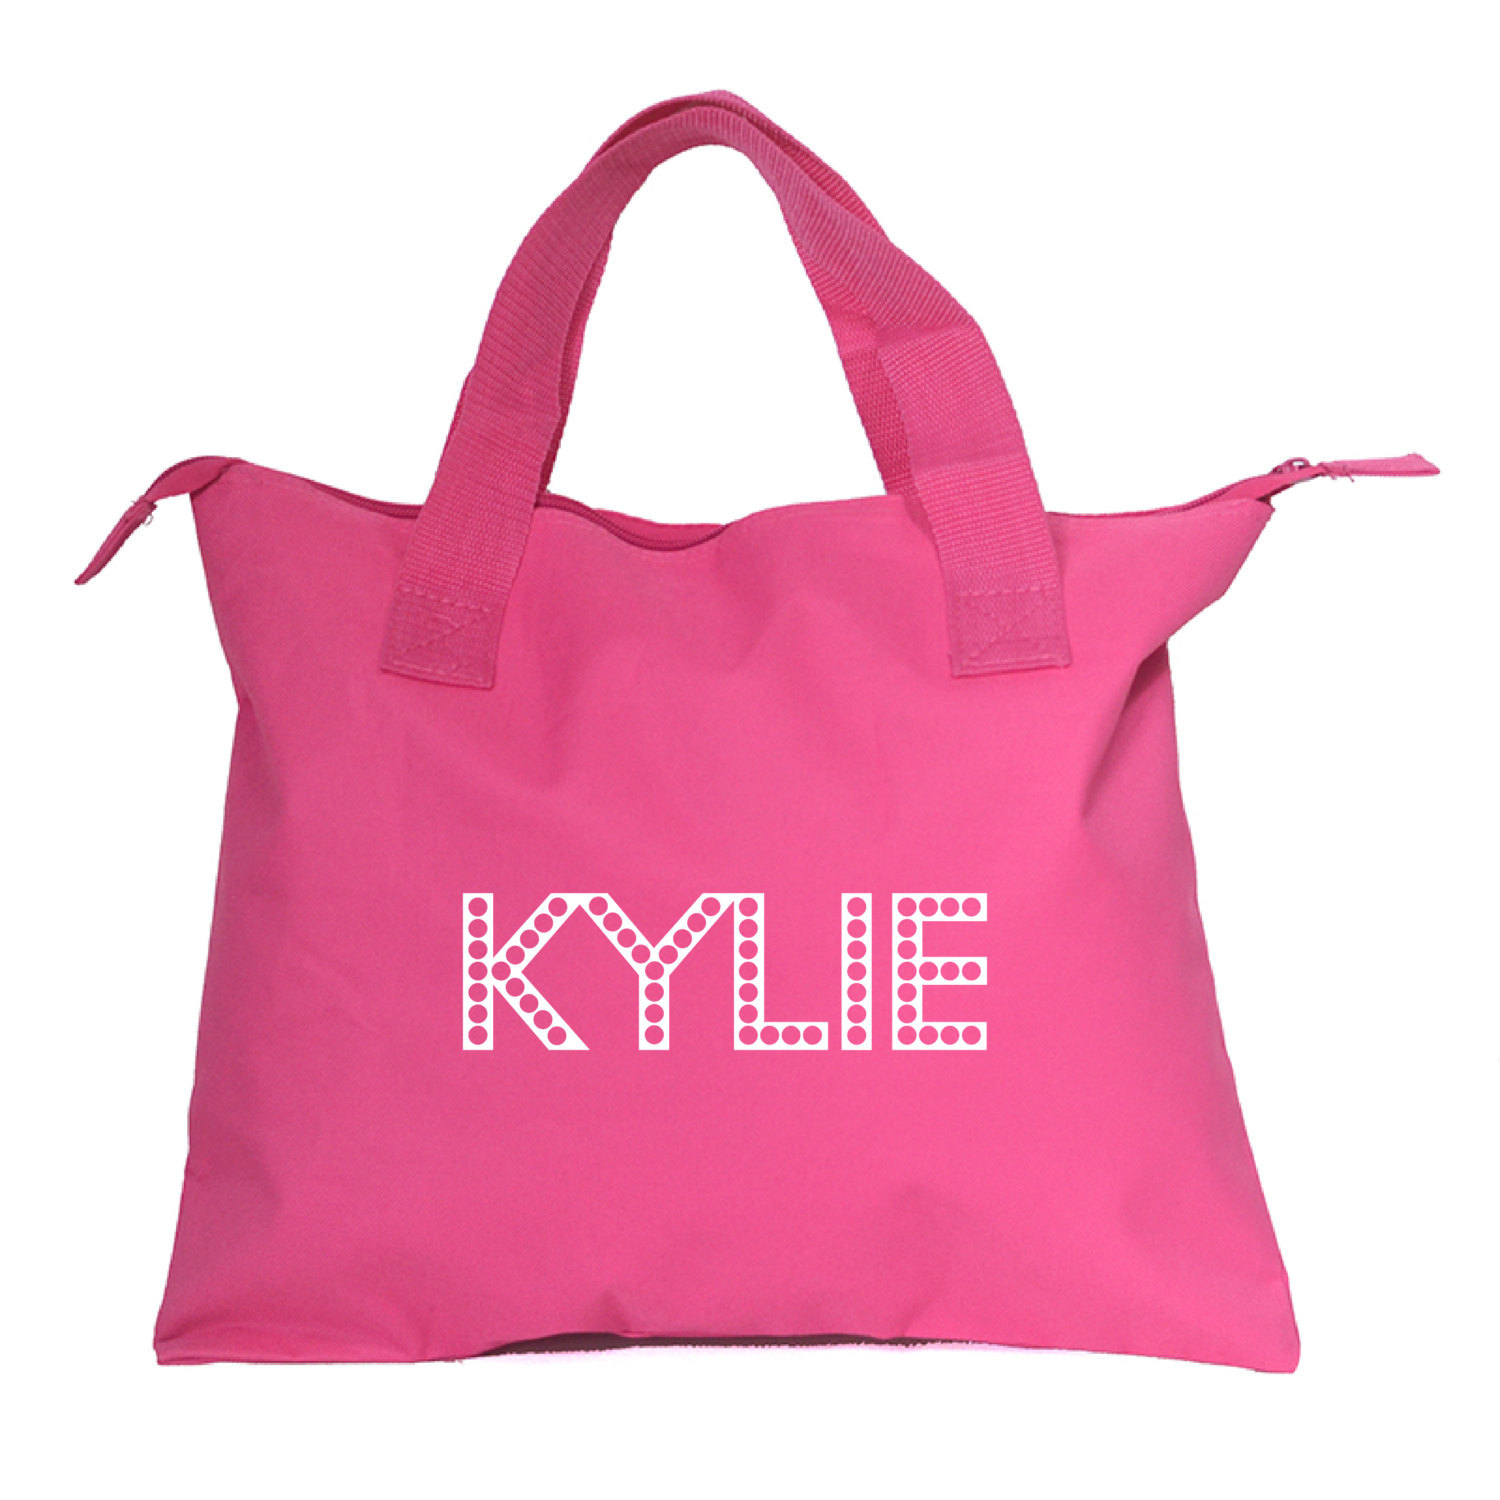 Personalized Kids Tote Bag